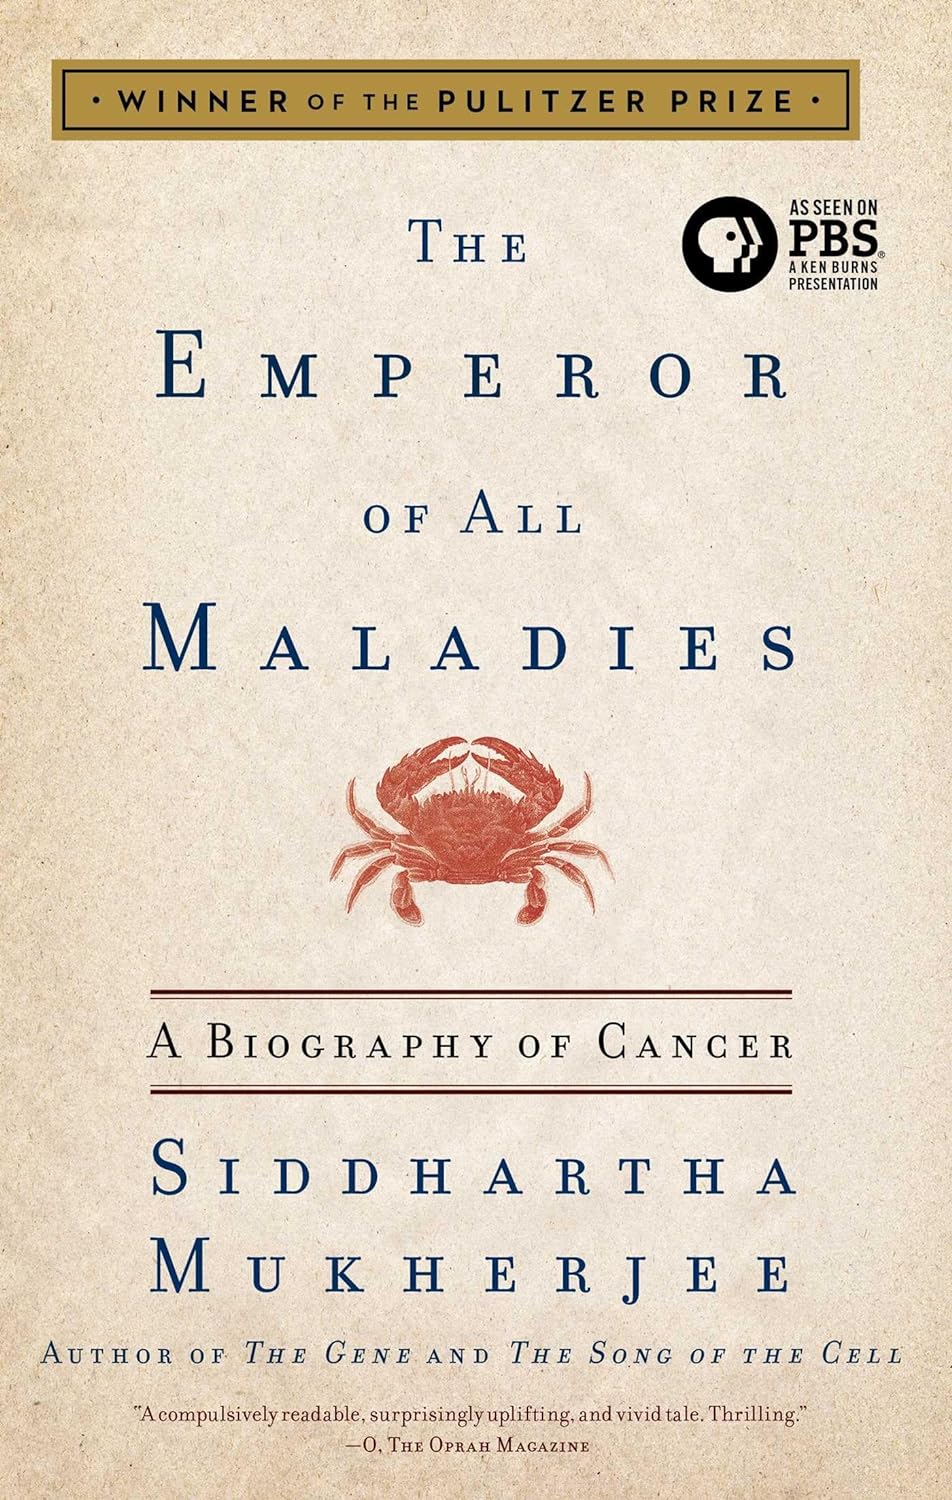 The Emperor of All Maladies A Biography of Cancer by Siddhartha Mukherjee (2010)